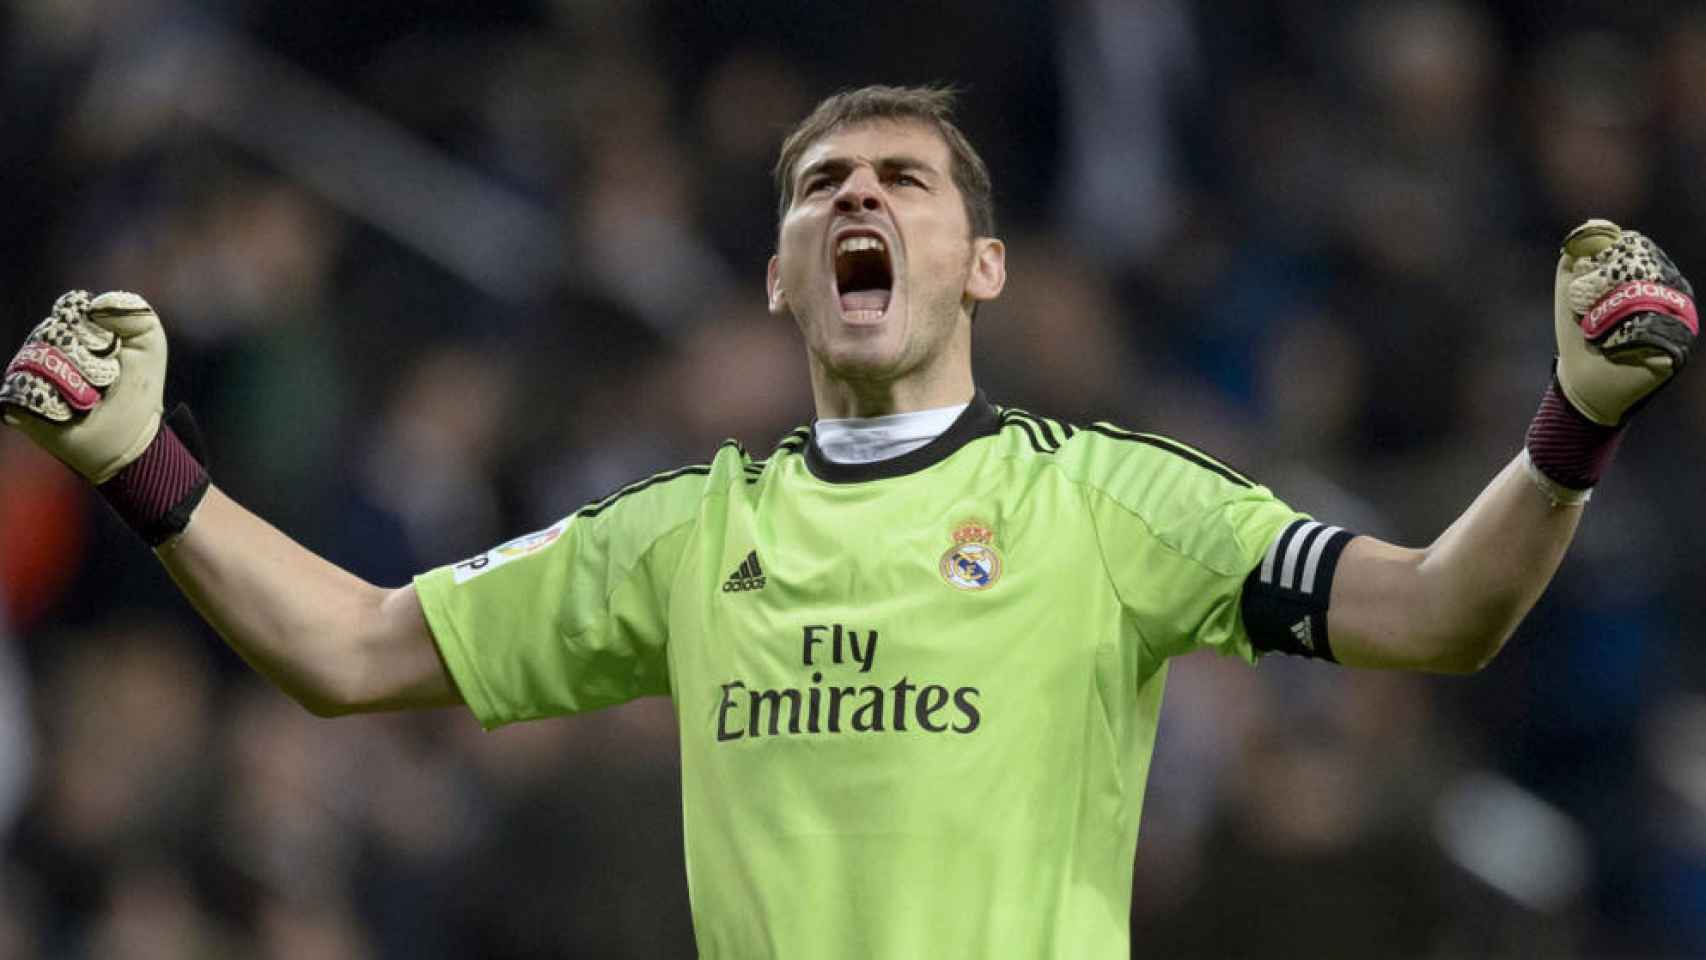 Spanish Football Legend Iker Casillas Gets New Role At Real Madrid